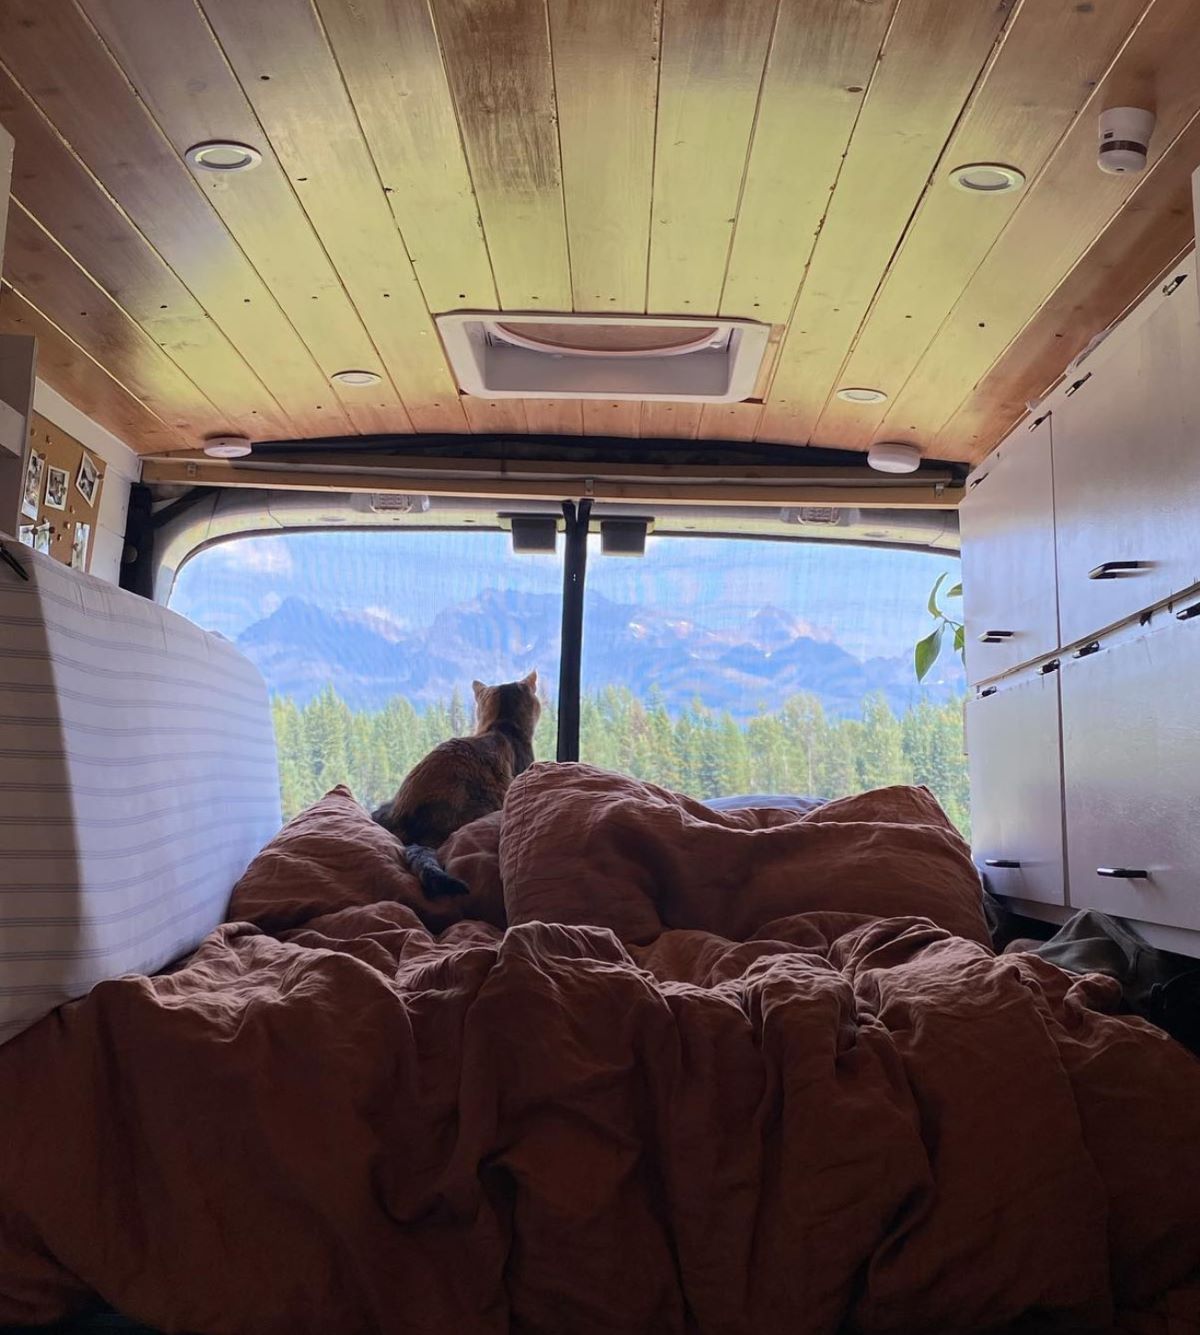 A cat sitting on a bed in a van looks out window